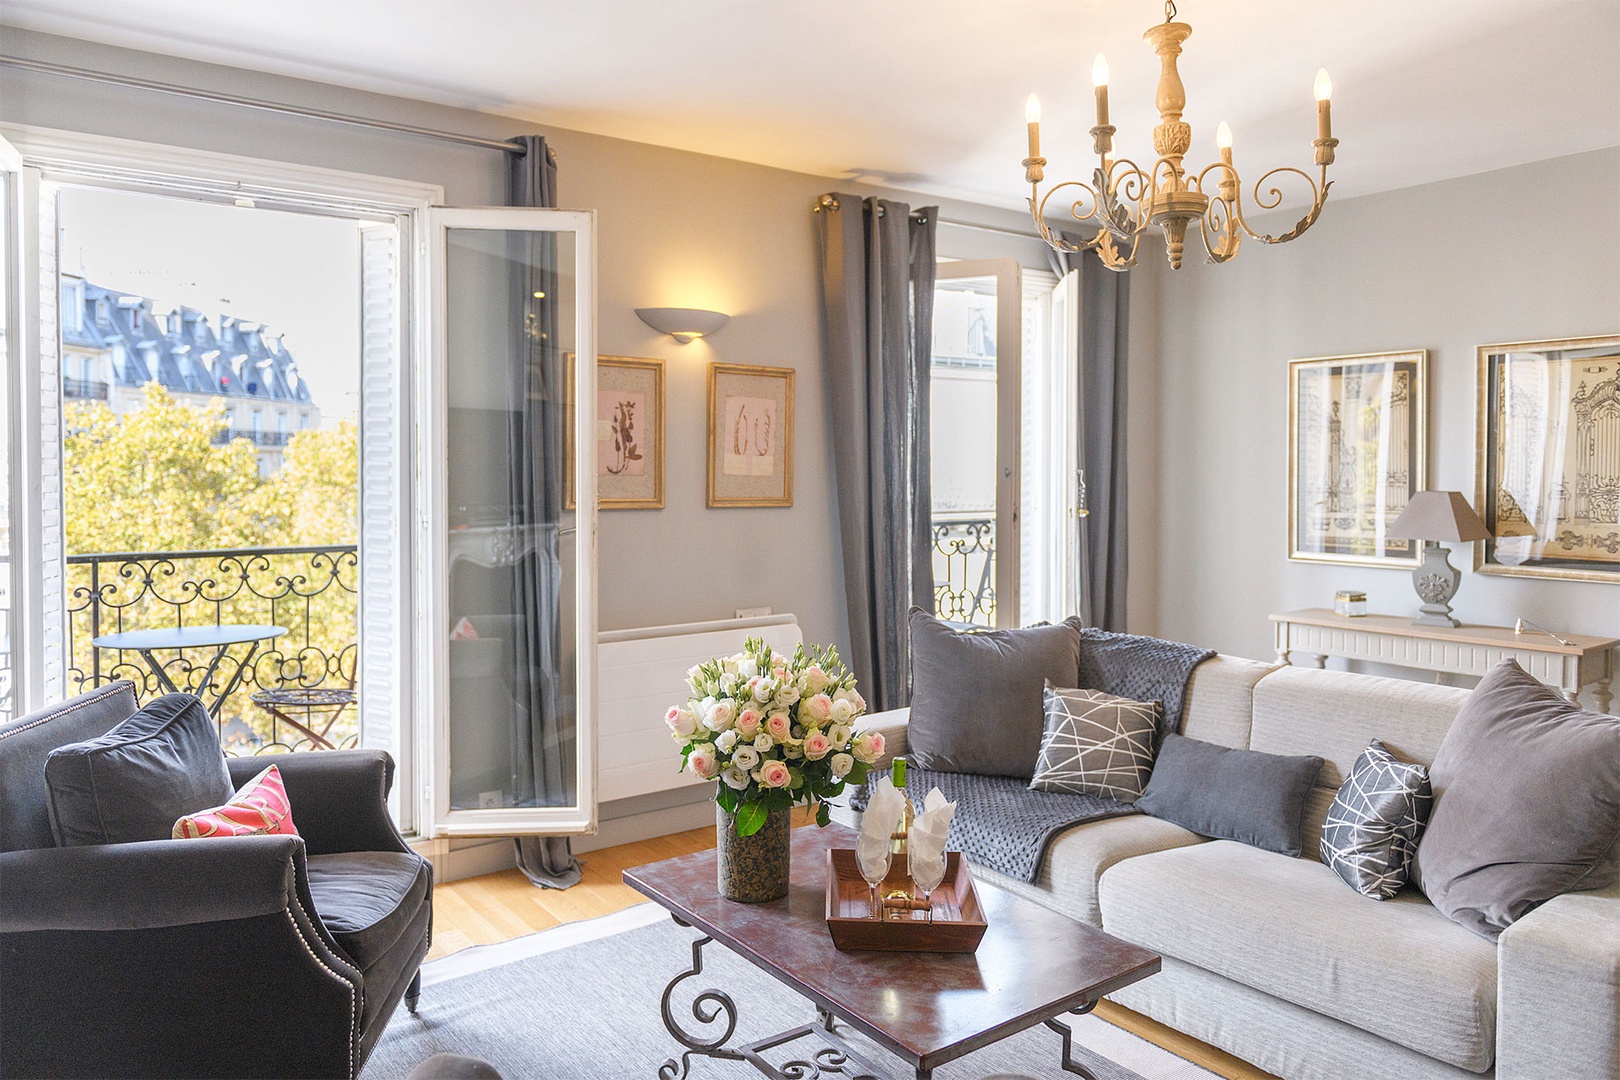 The spacious living room is perfect for celebrating your Paris vacation in comfort.